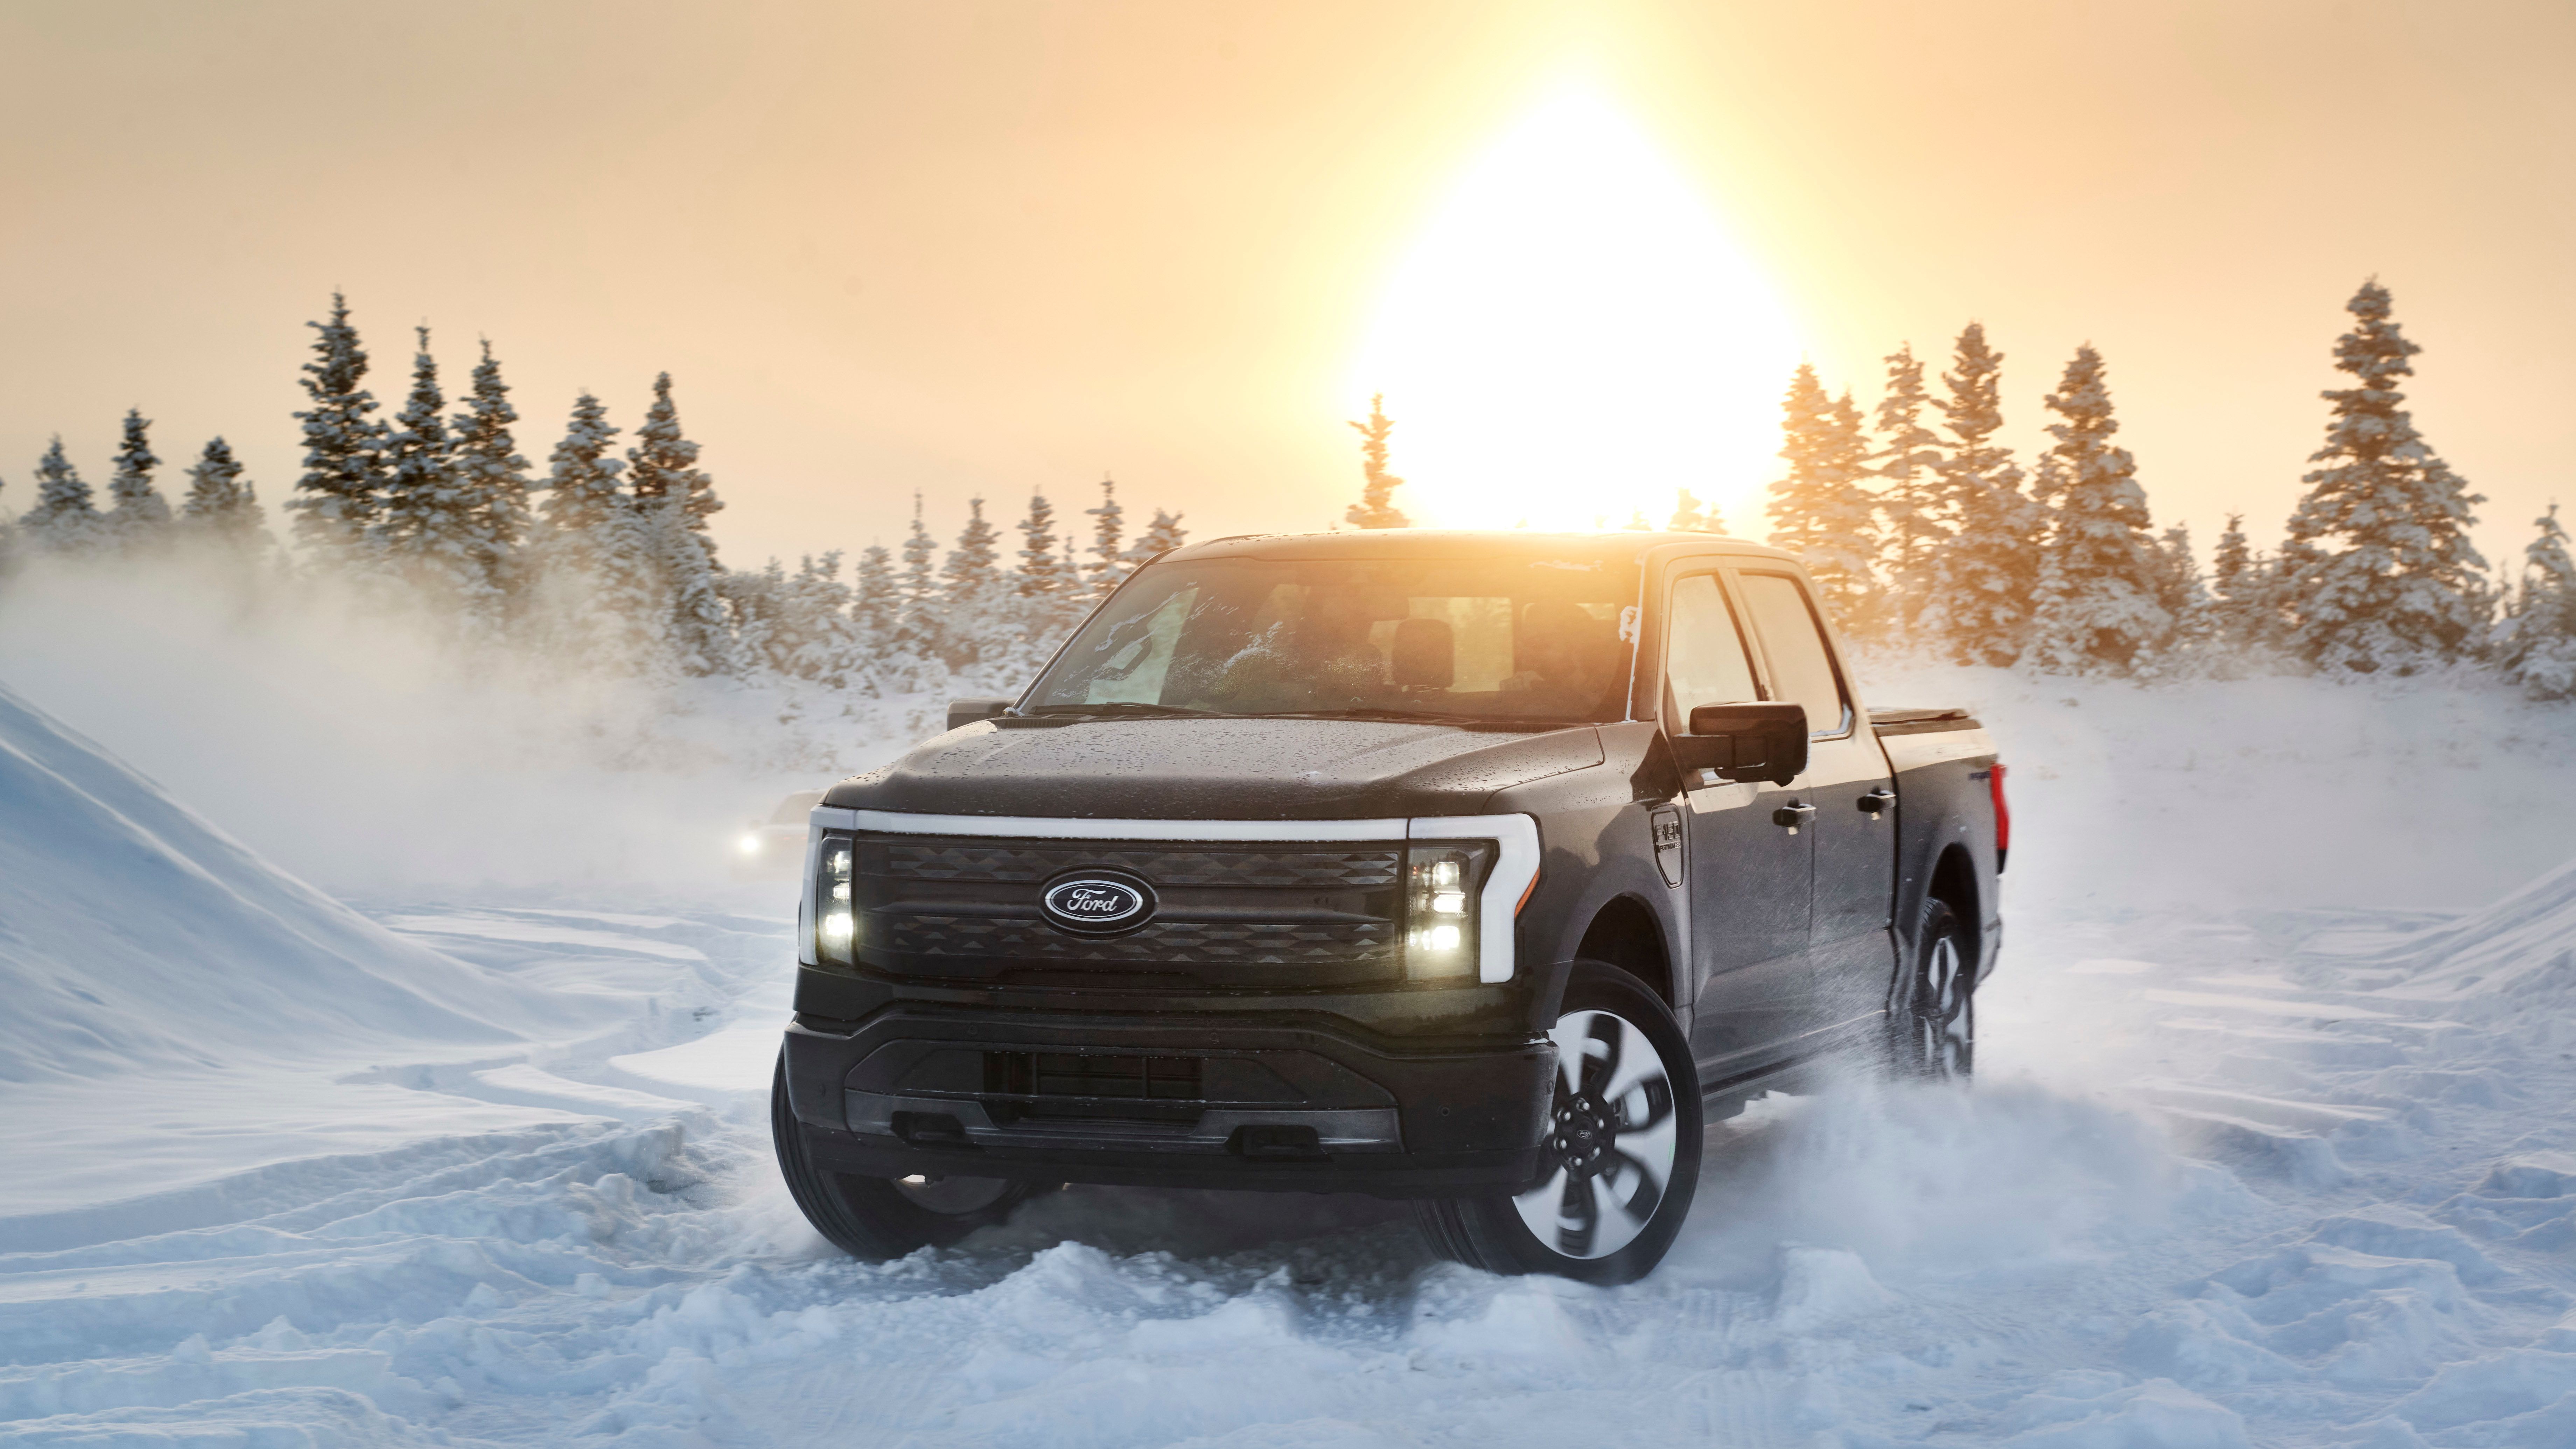 2022 Ford F-150 Lightning testing in snowy Alaska with the sun behind it.